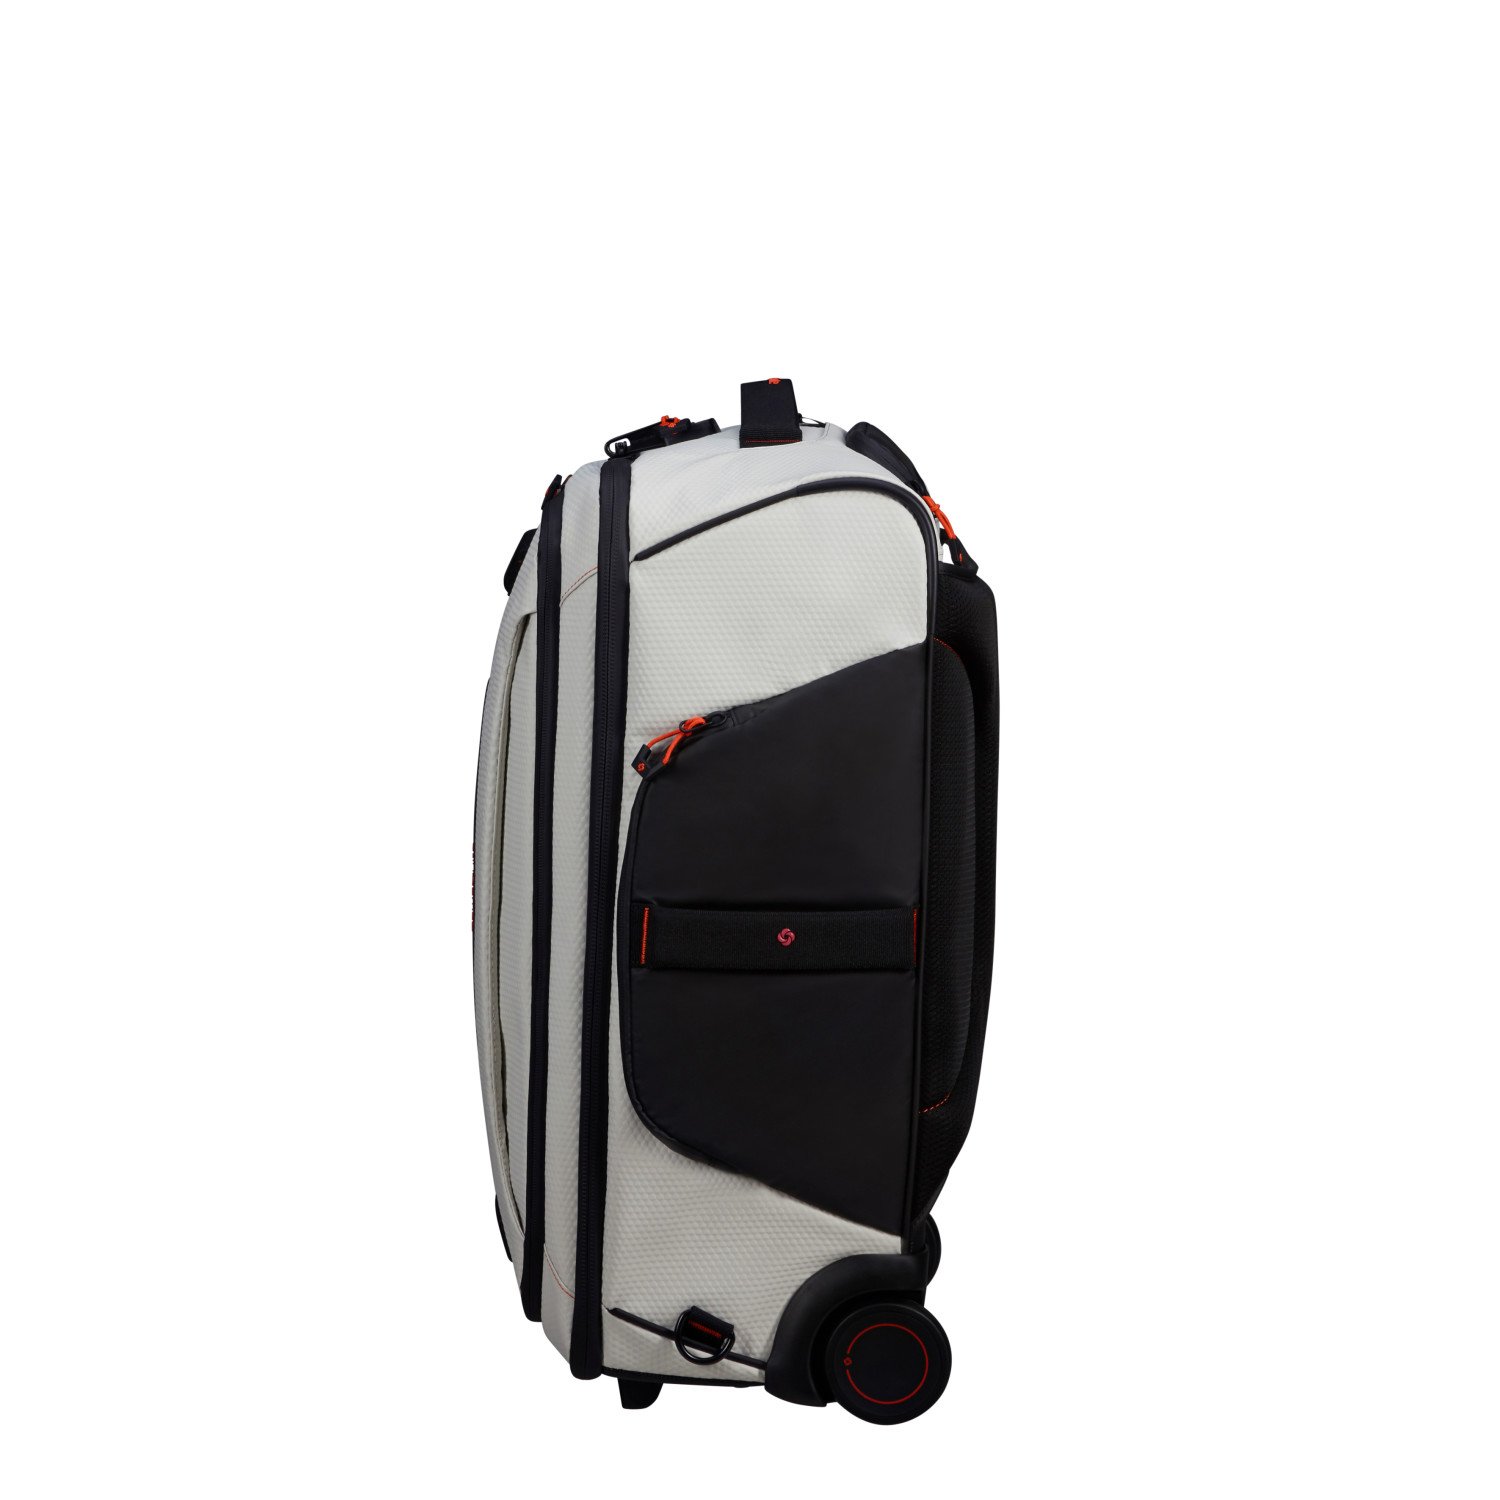 ECODIVER-DUFFLE/WH 55/20 BACKPACK SKH7-012-SF000*05